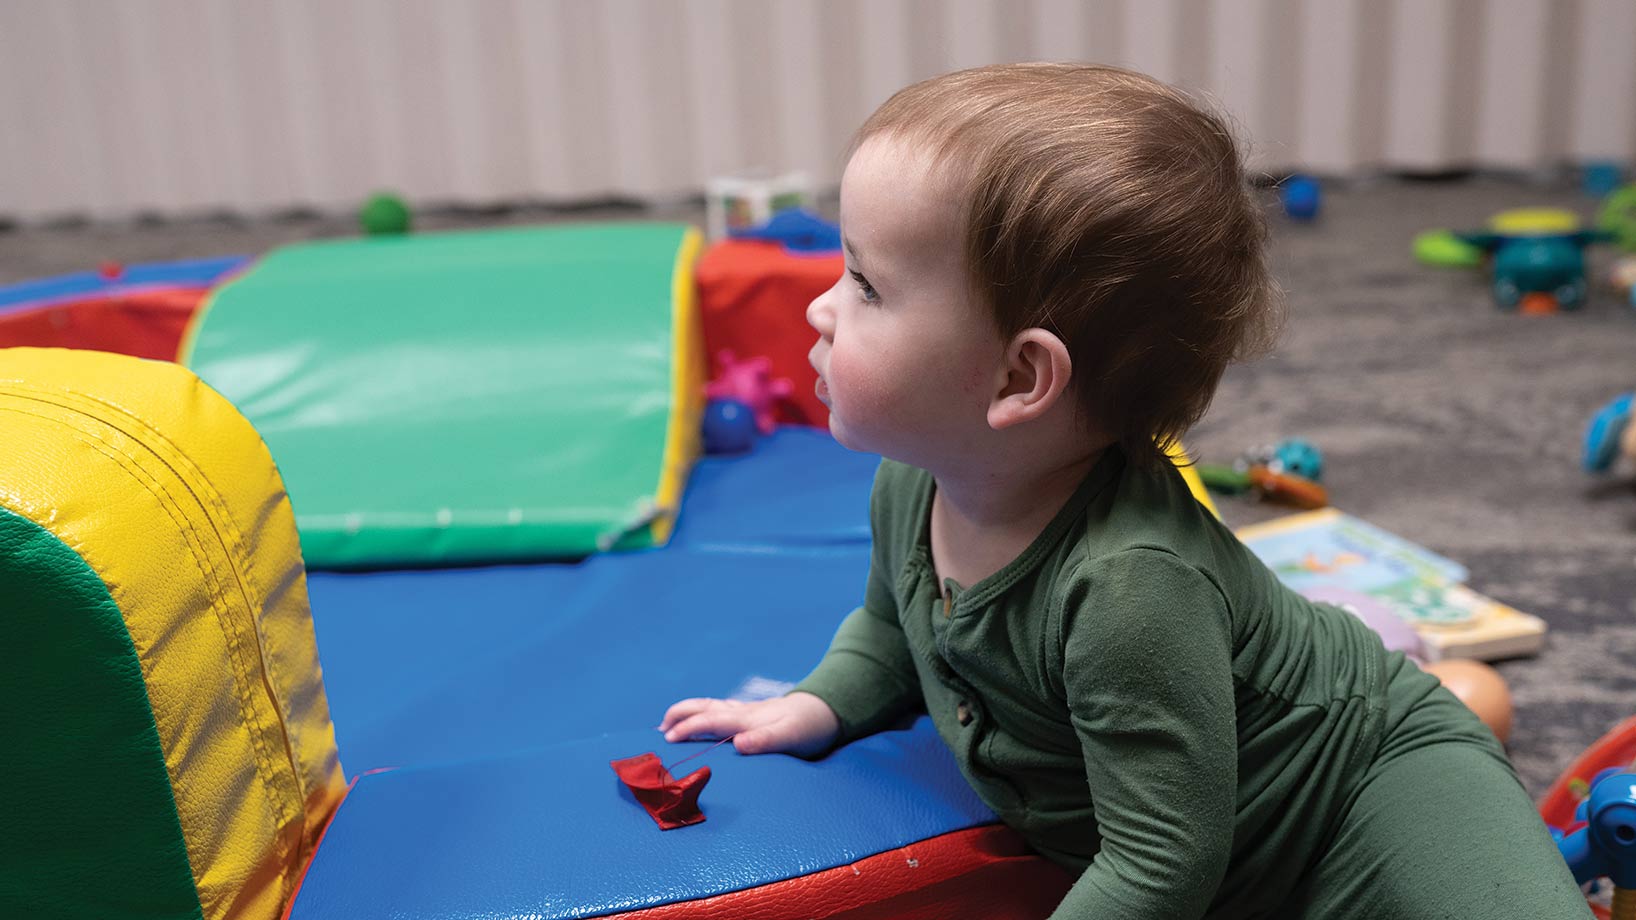 Small toddler on colorful playmat